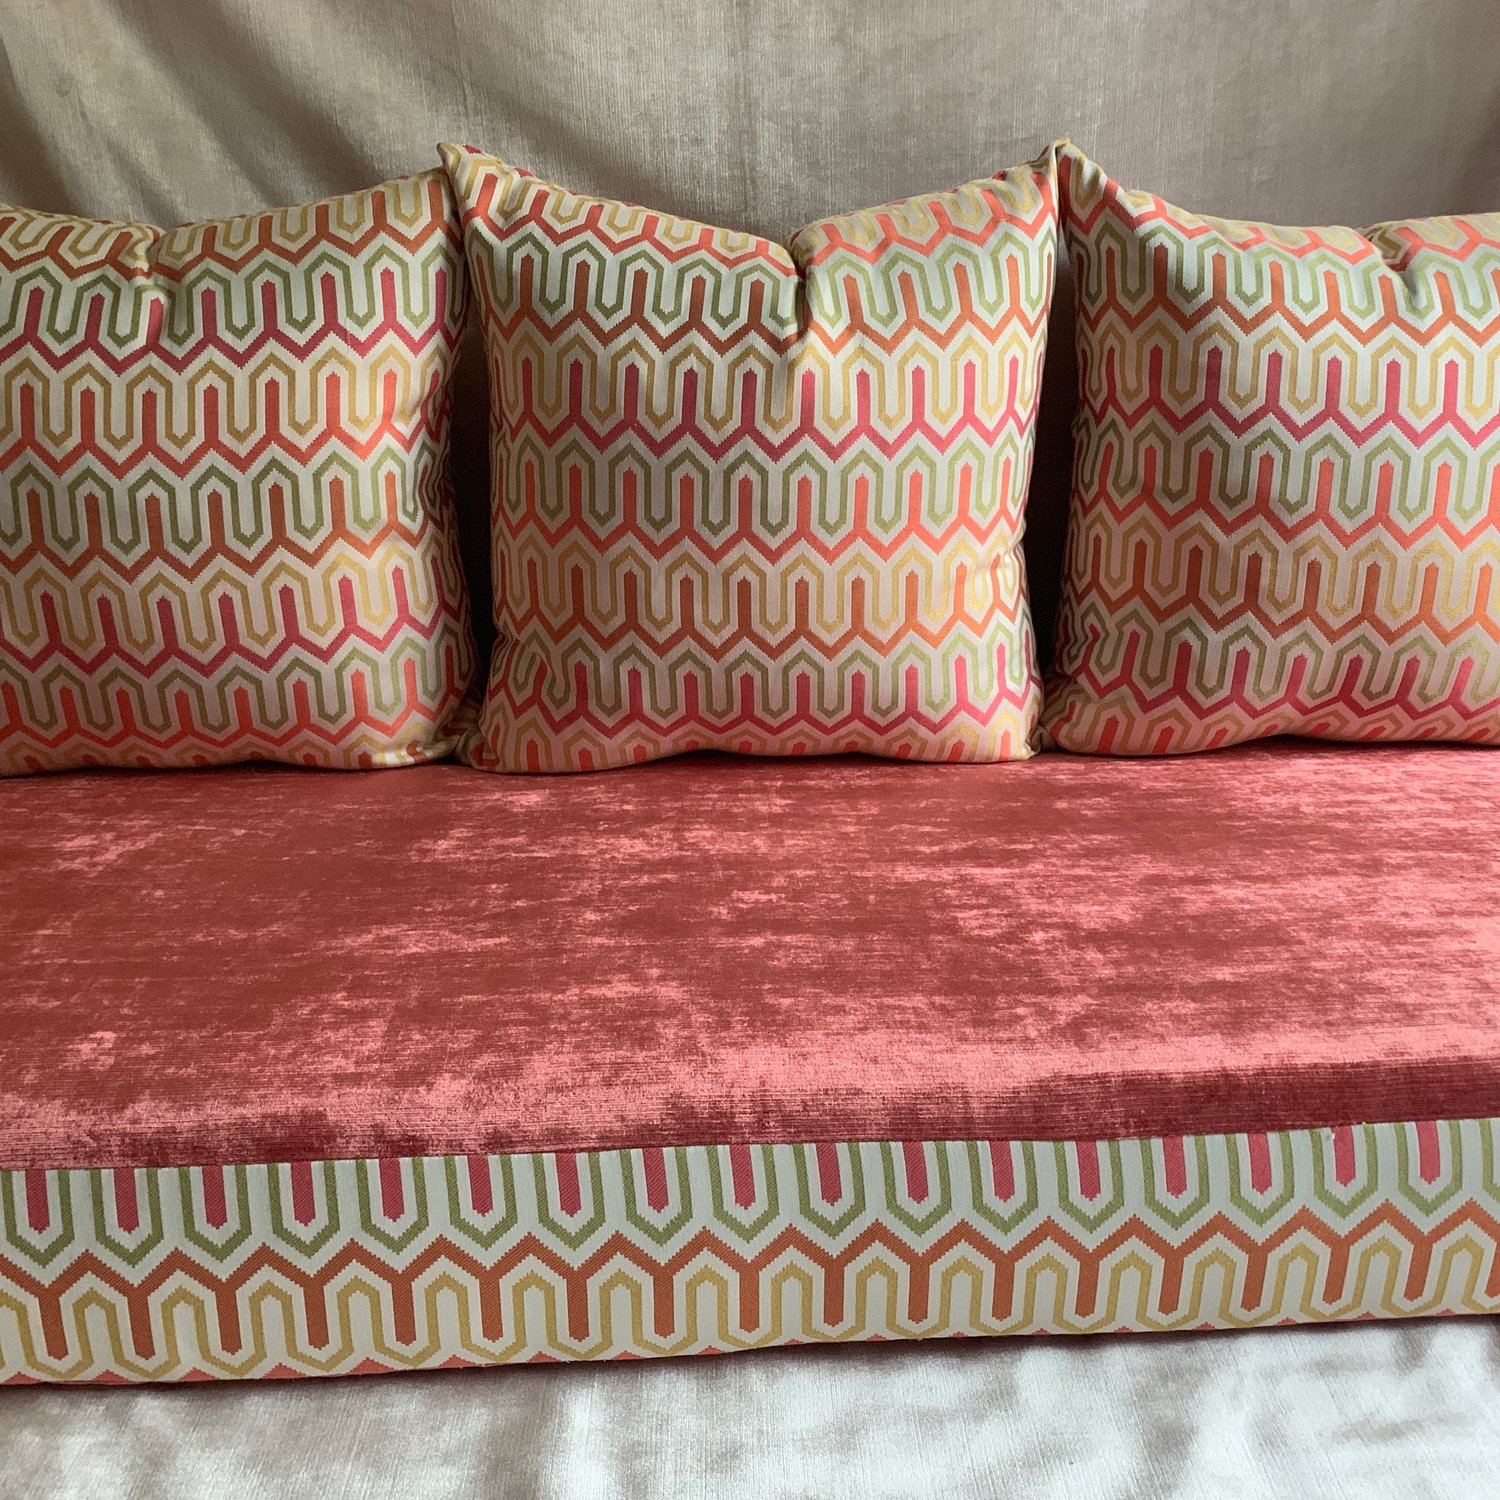 Image of Pink Palace Floor Sofa